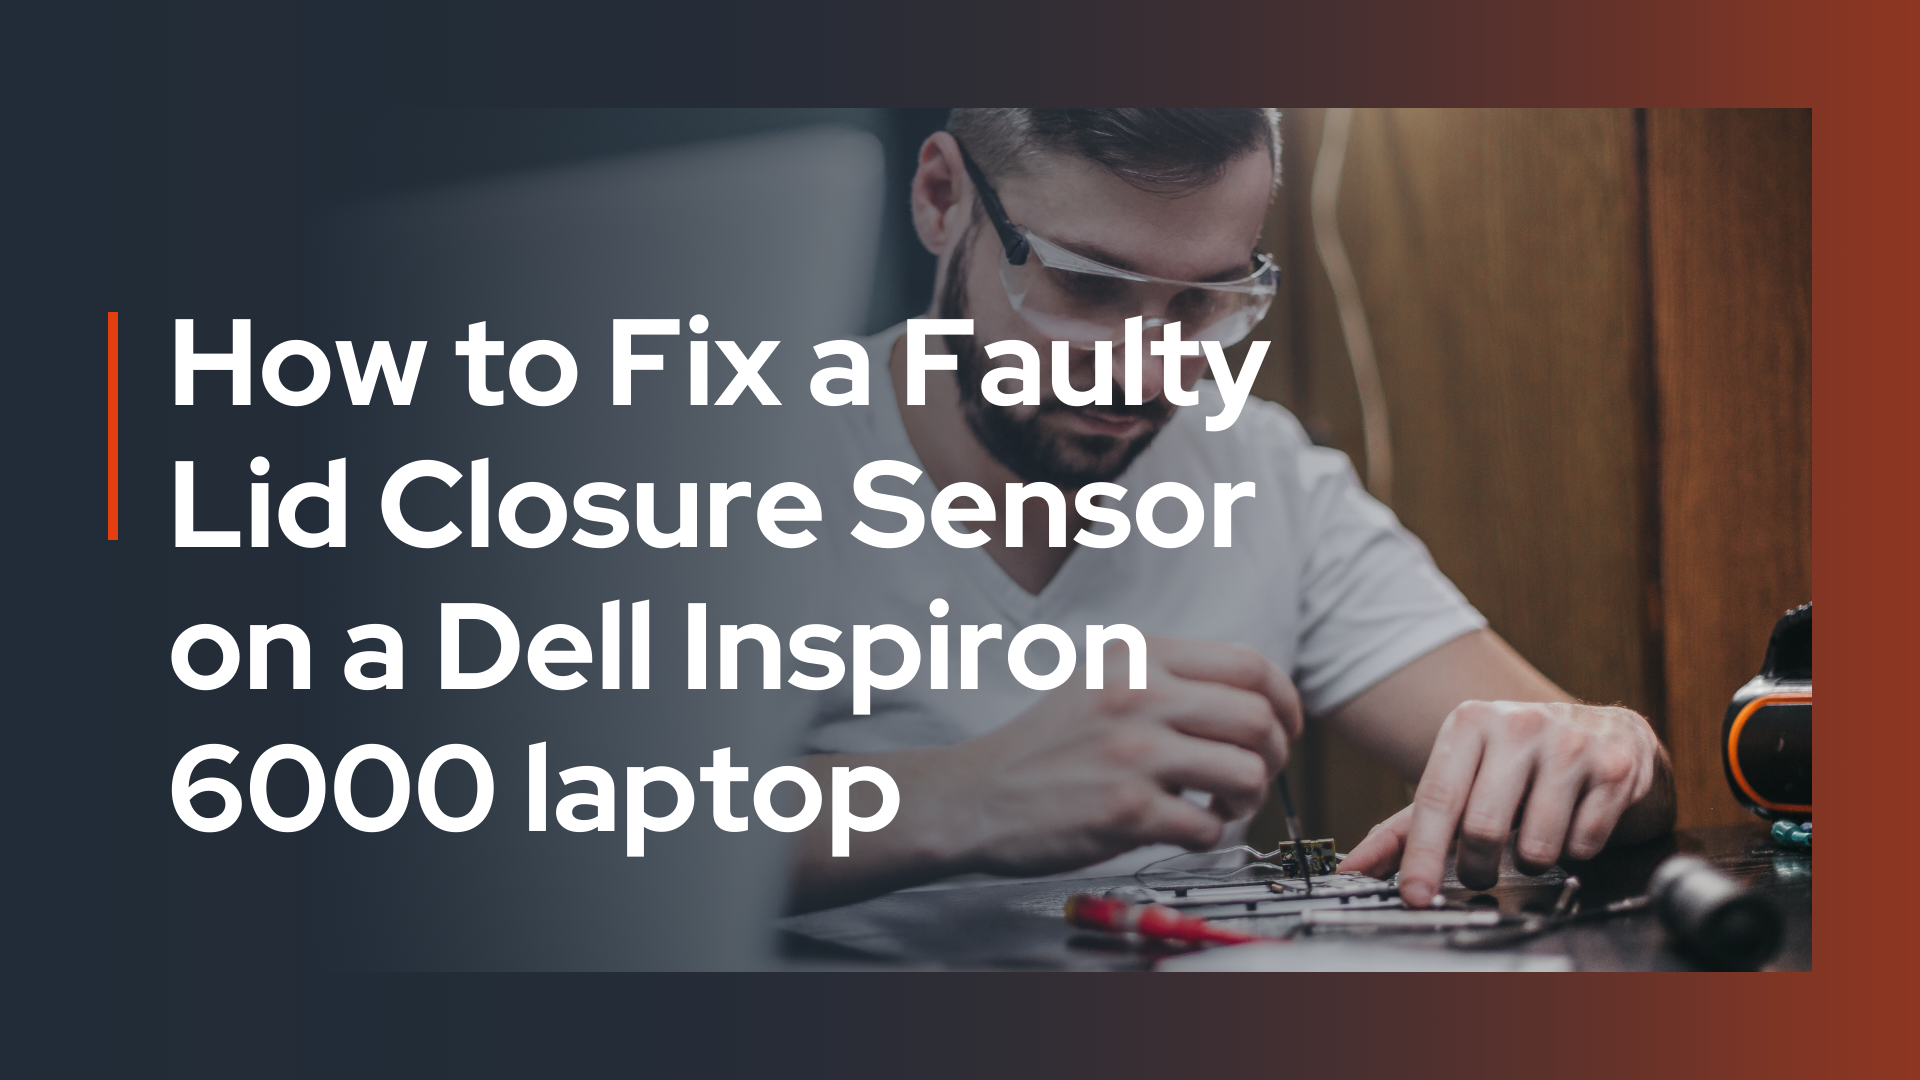 How to Fix a Faulty Lid Closure Sensor on a Dell Inspiron 6000 laptop